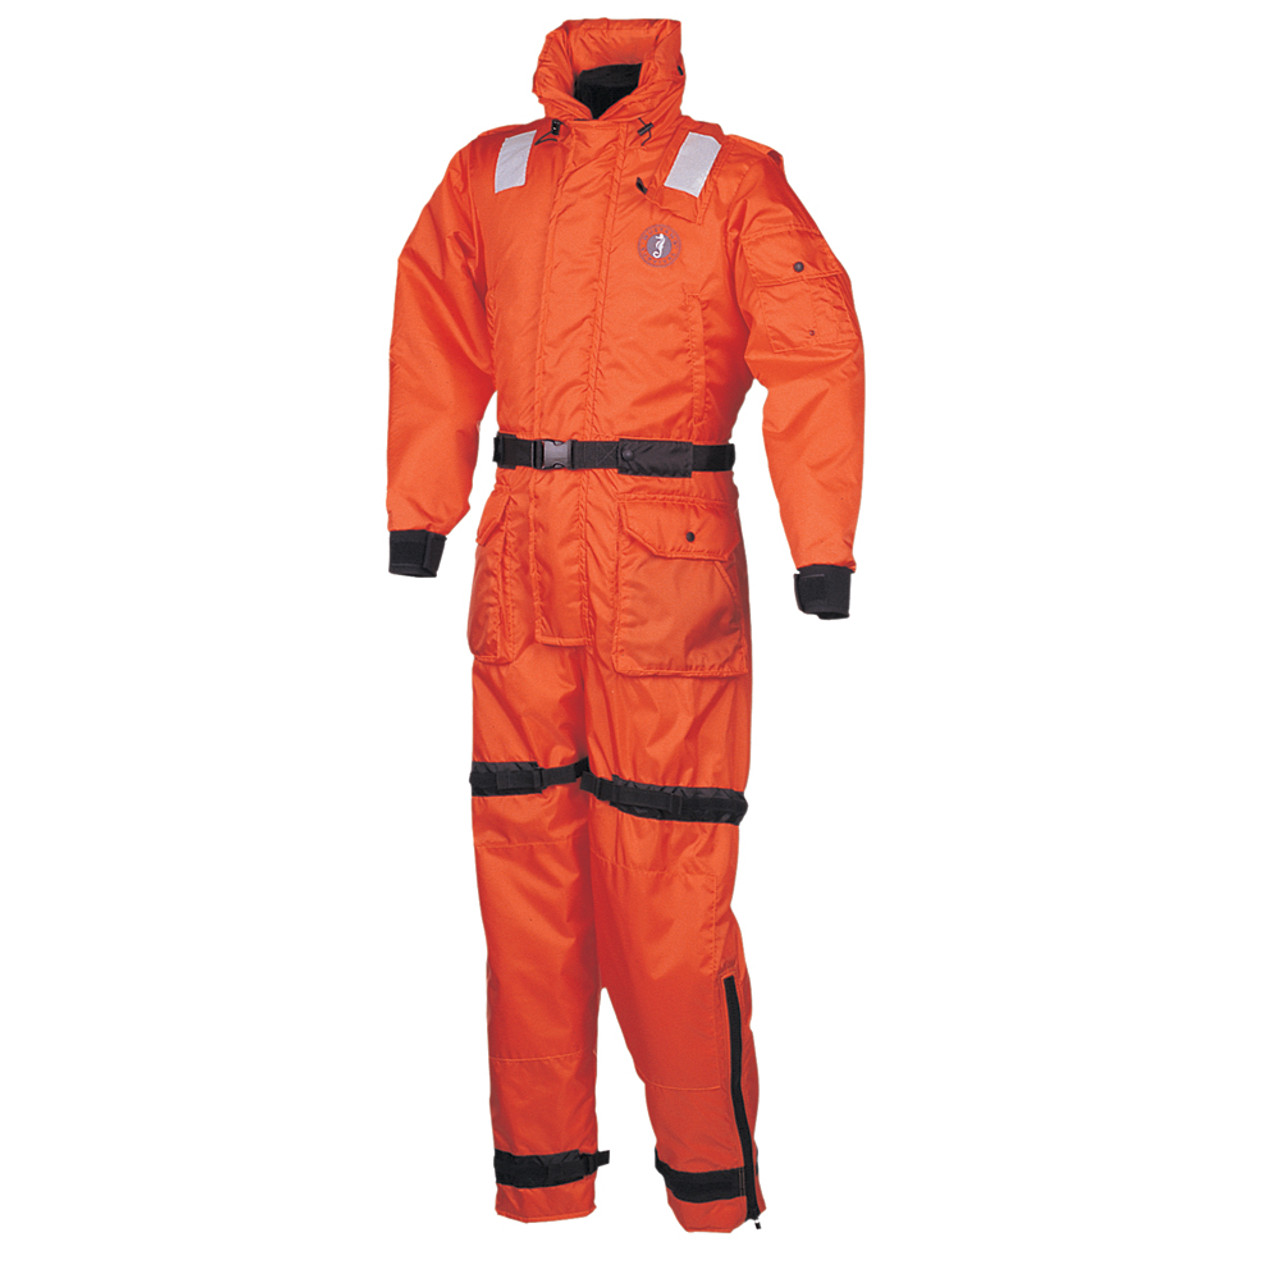 Mustang Deluxe Anti-Exposure Coverall &amp; Work Suit - Orange - Small